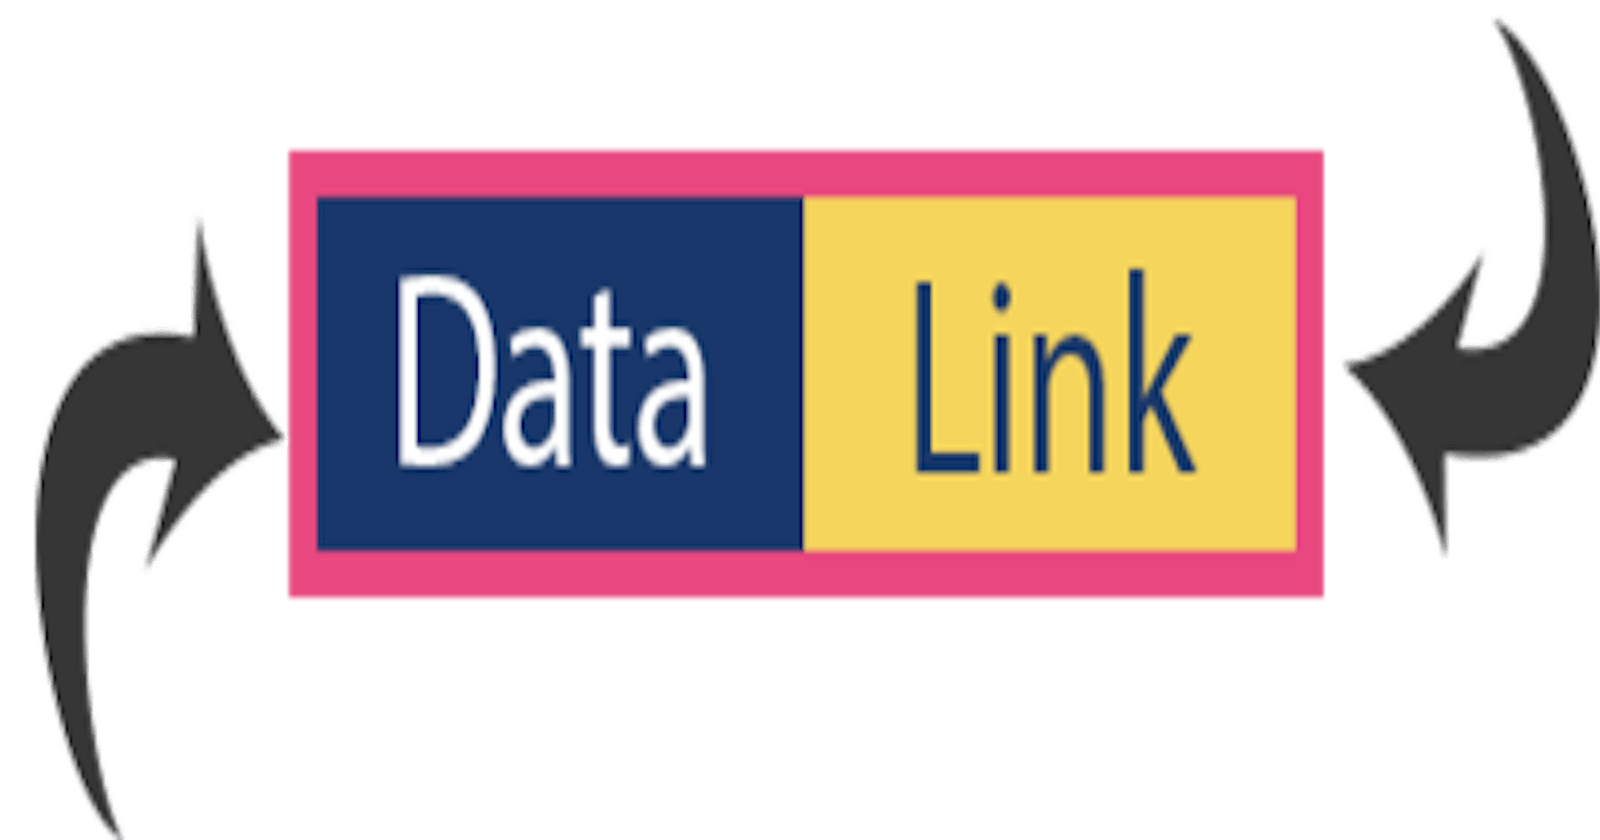 Learn and Implement Data Structure in JS - Singly LinkedList